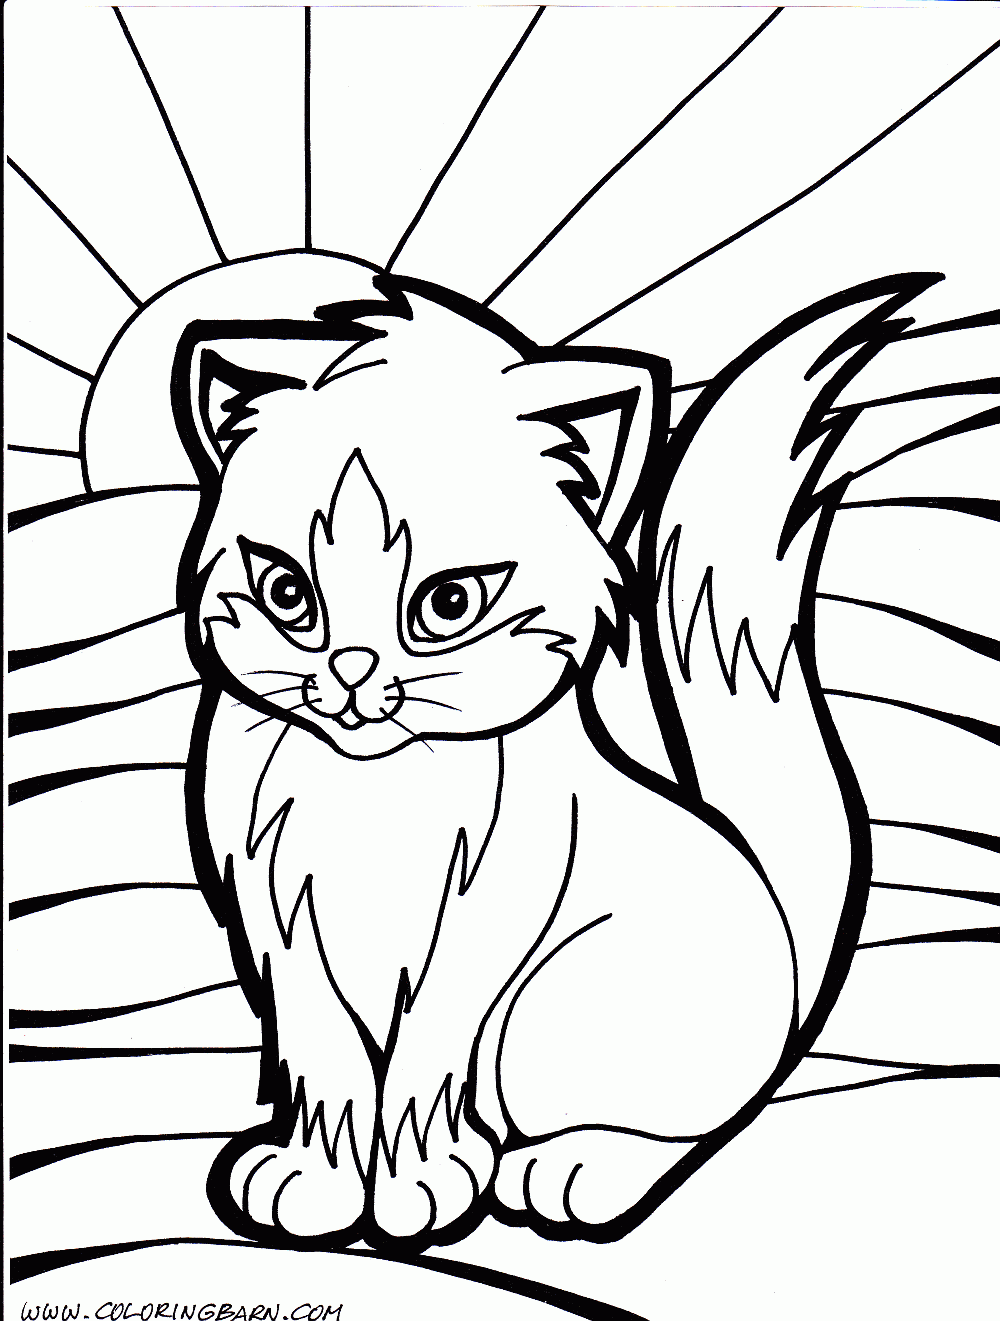 kitten-coloring-page-0026-q1